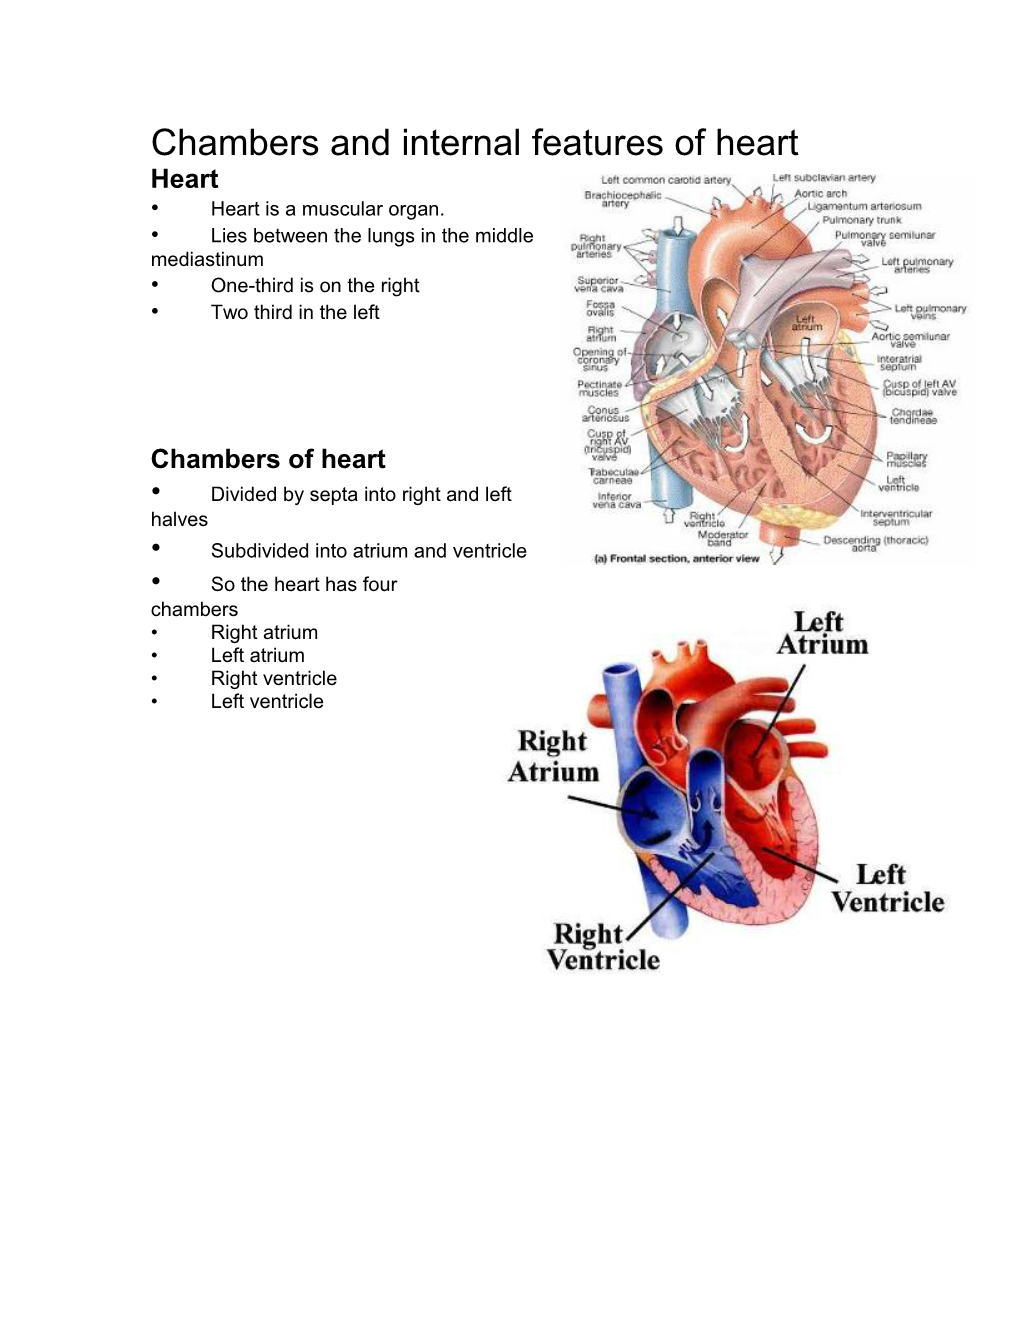 Chambers and Internal Features of Heart